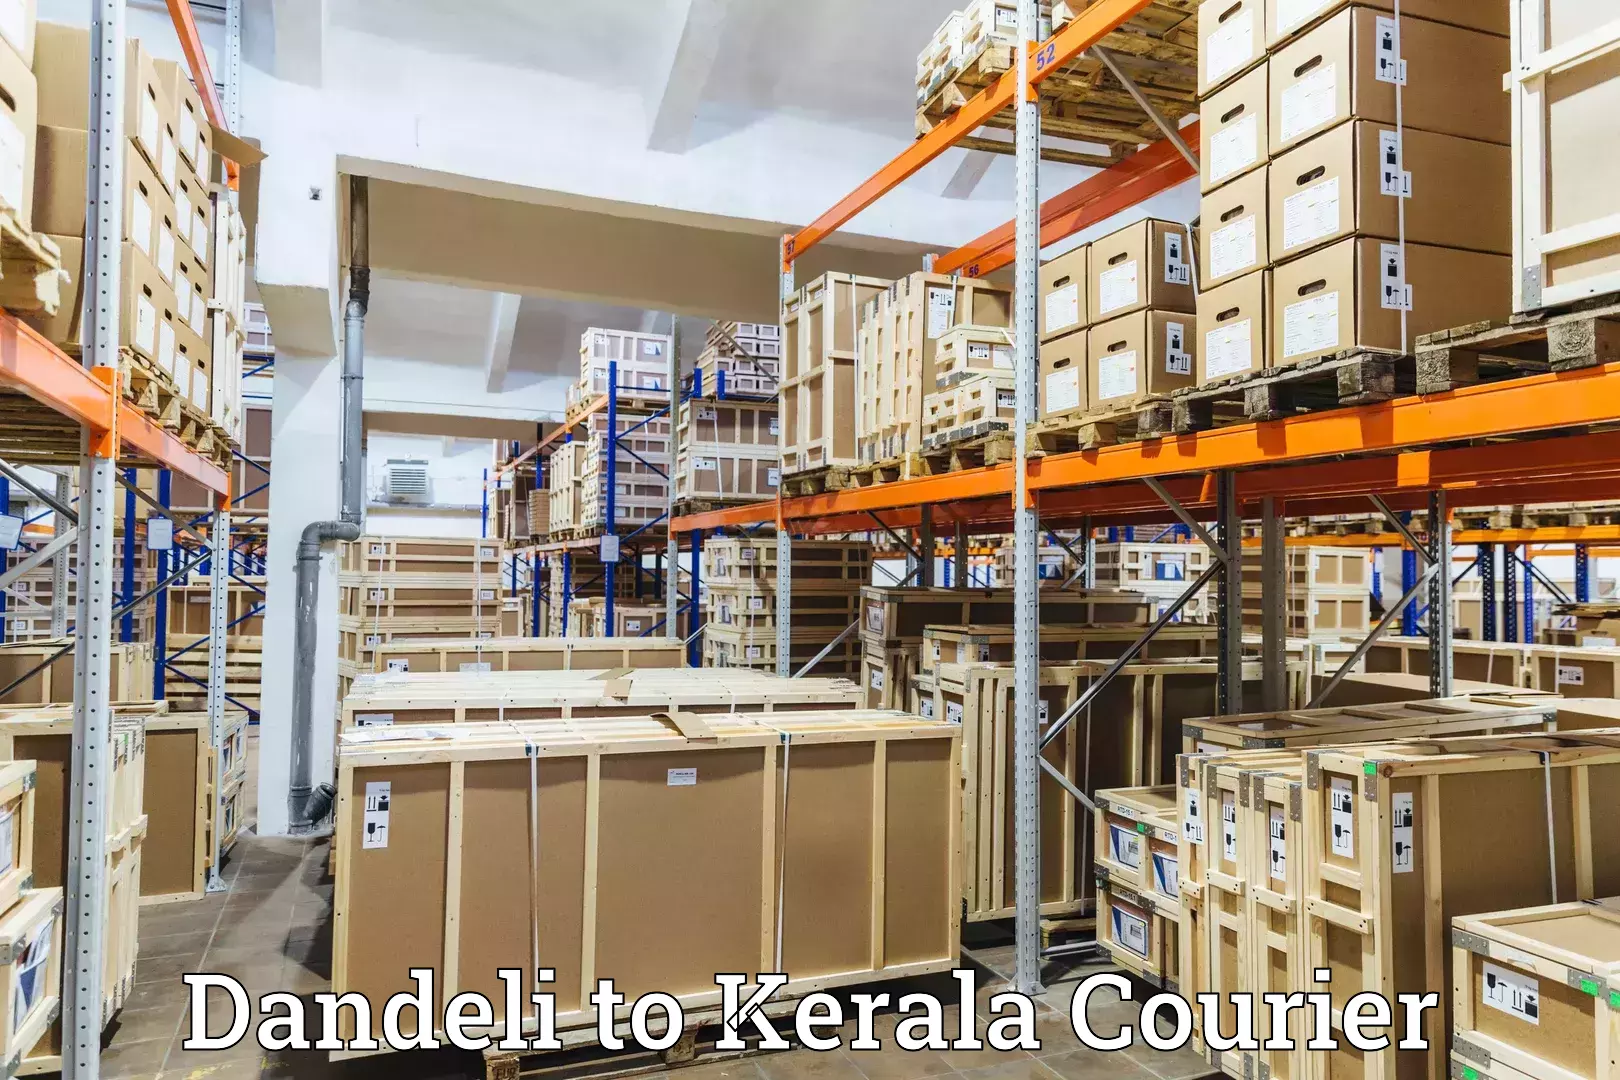 Local courier options in Dandeli to Chalakudy